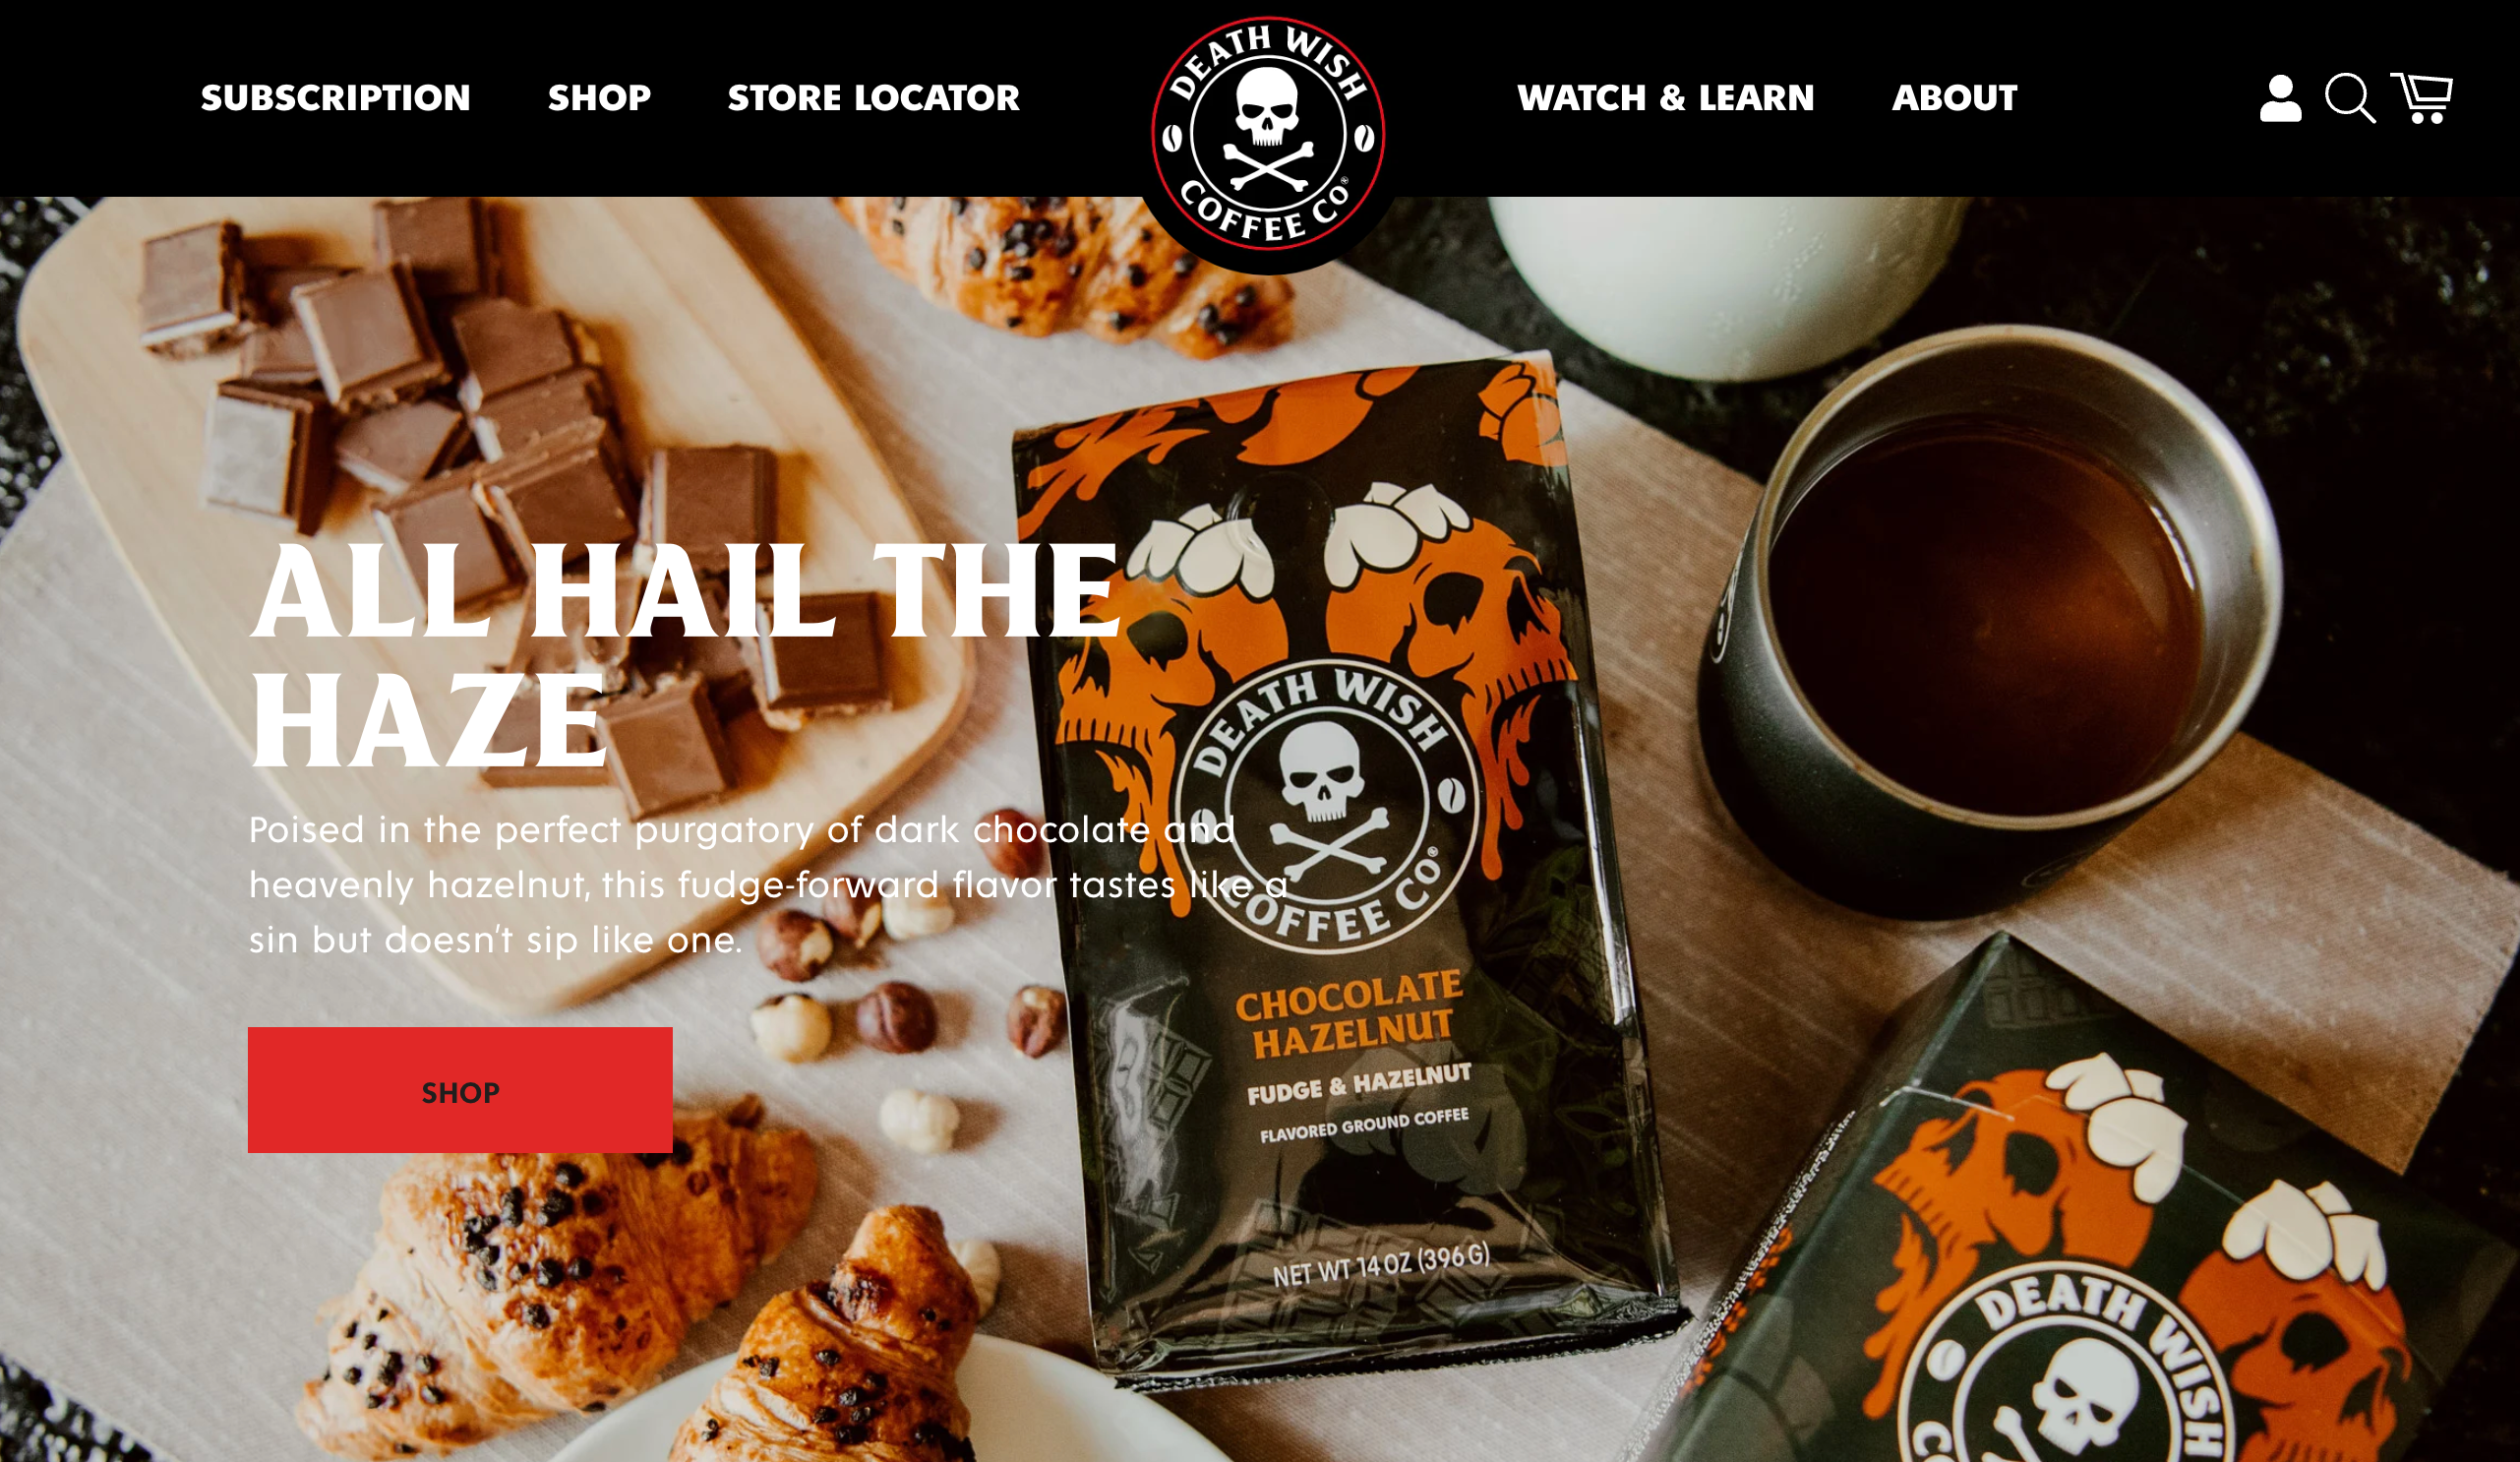 Screen grab of homepage on the Death Wish Coffee ecommerce website